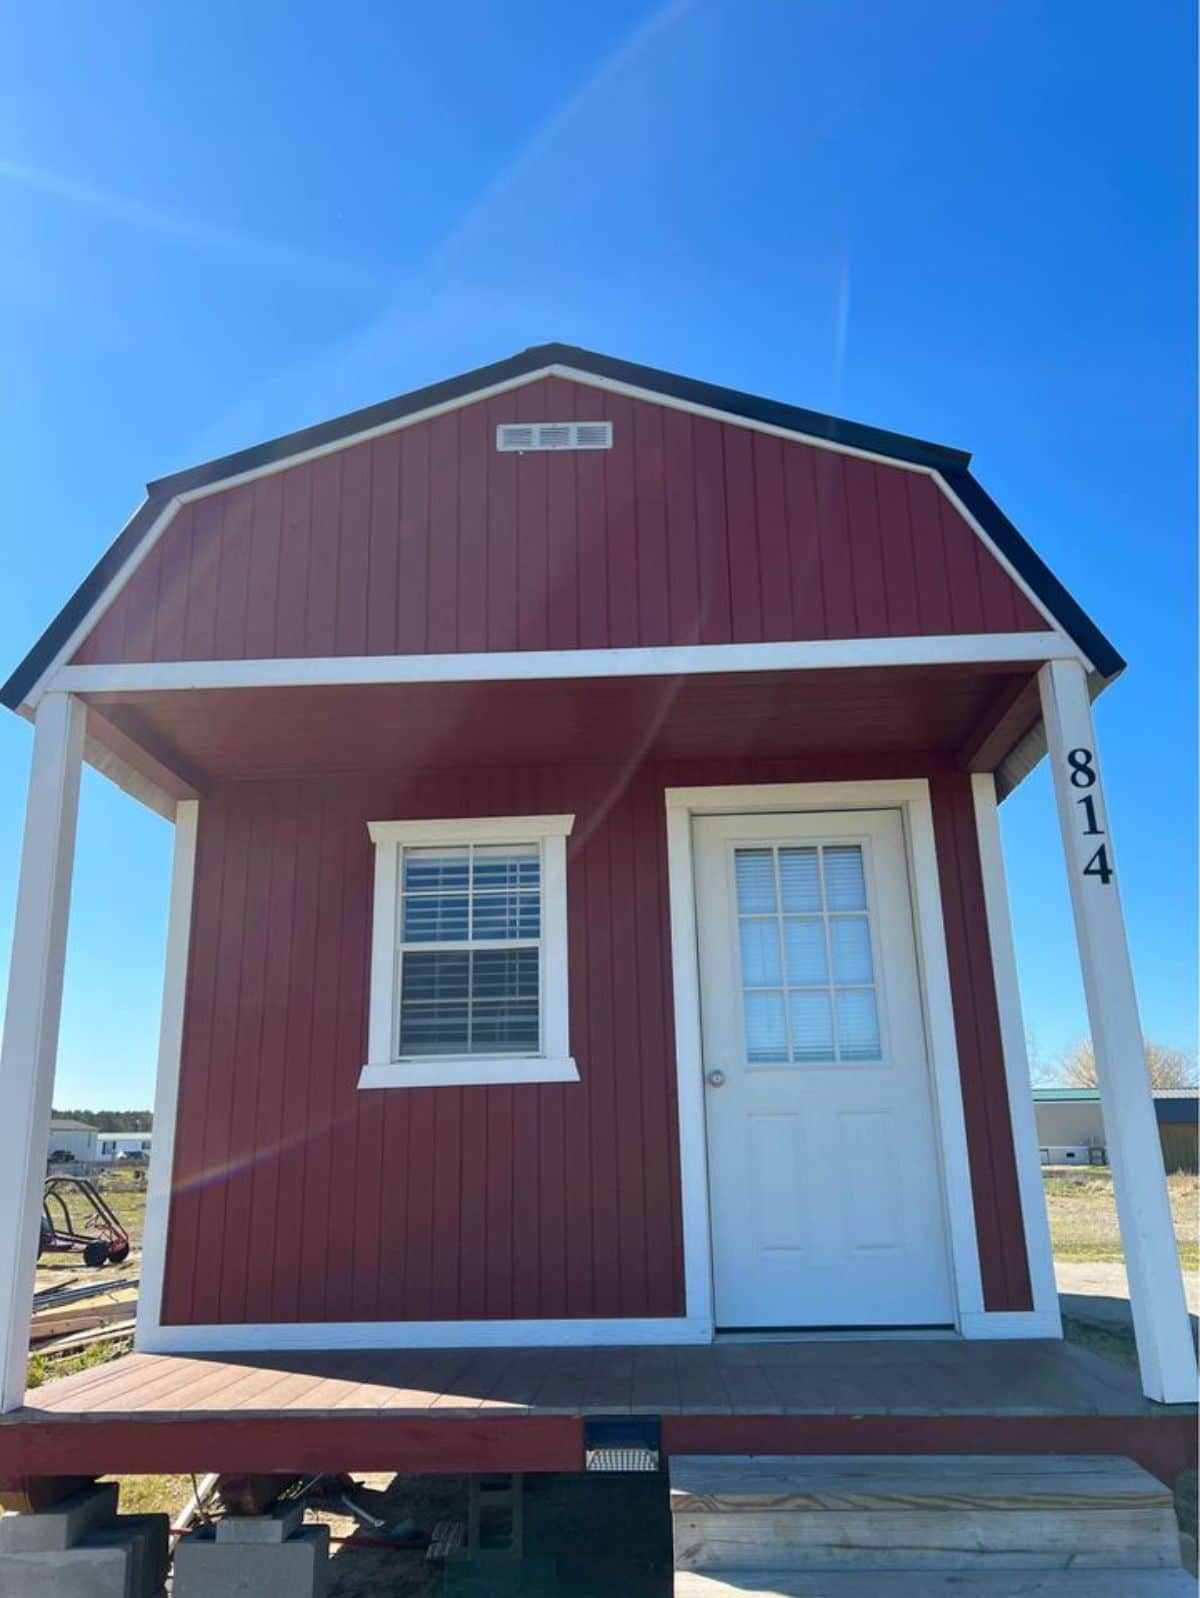 Front view of 1 Bedroom Barn-Style Tiny House